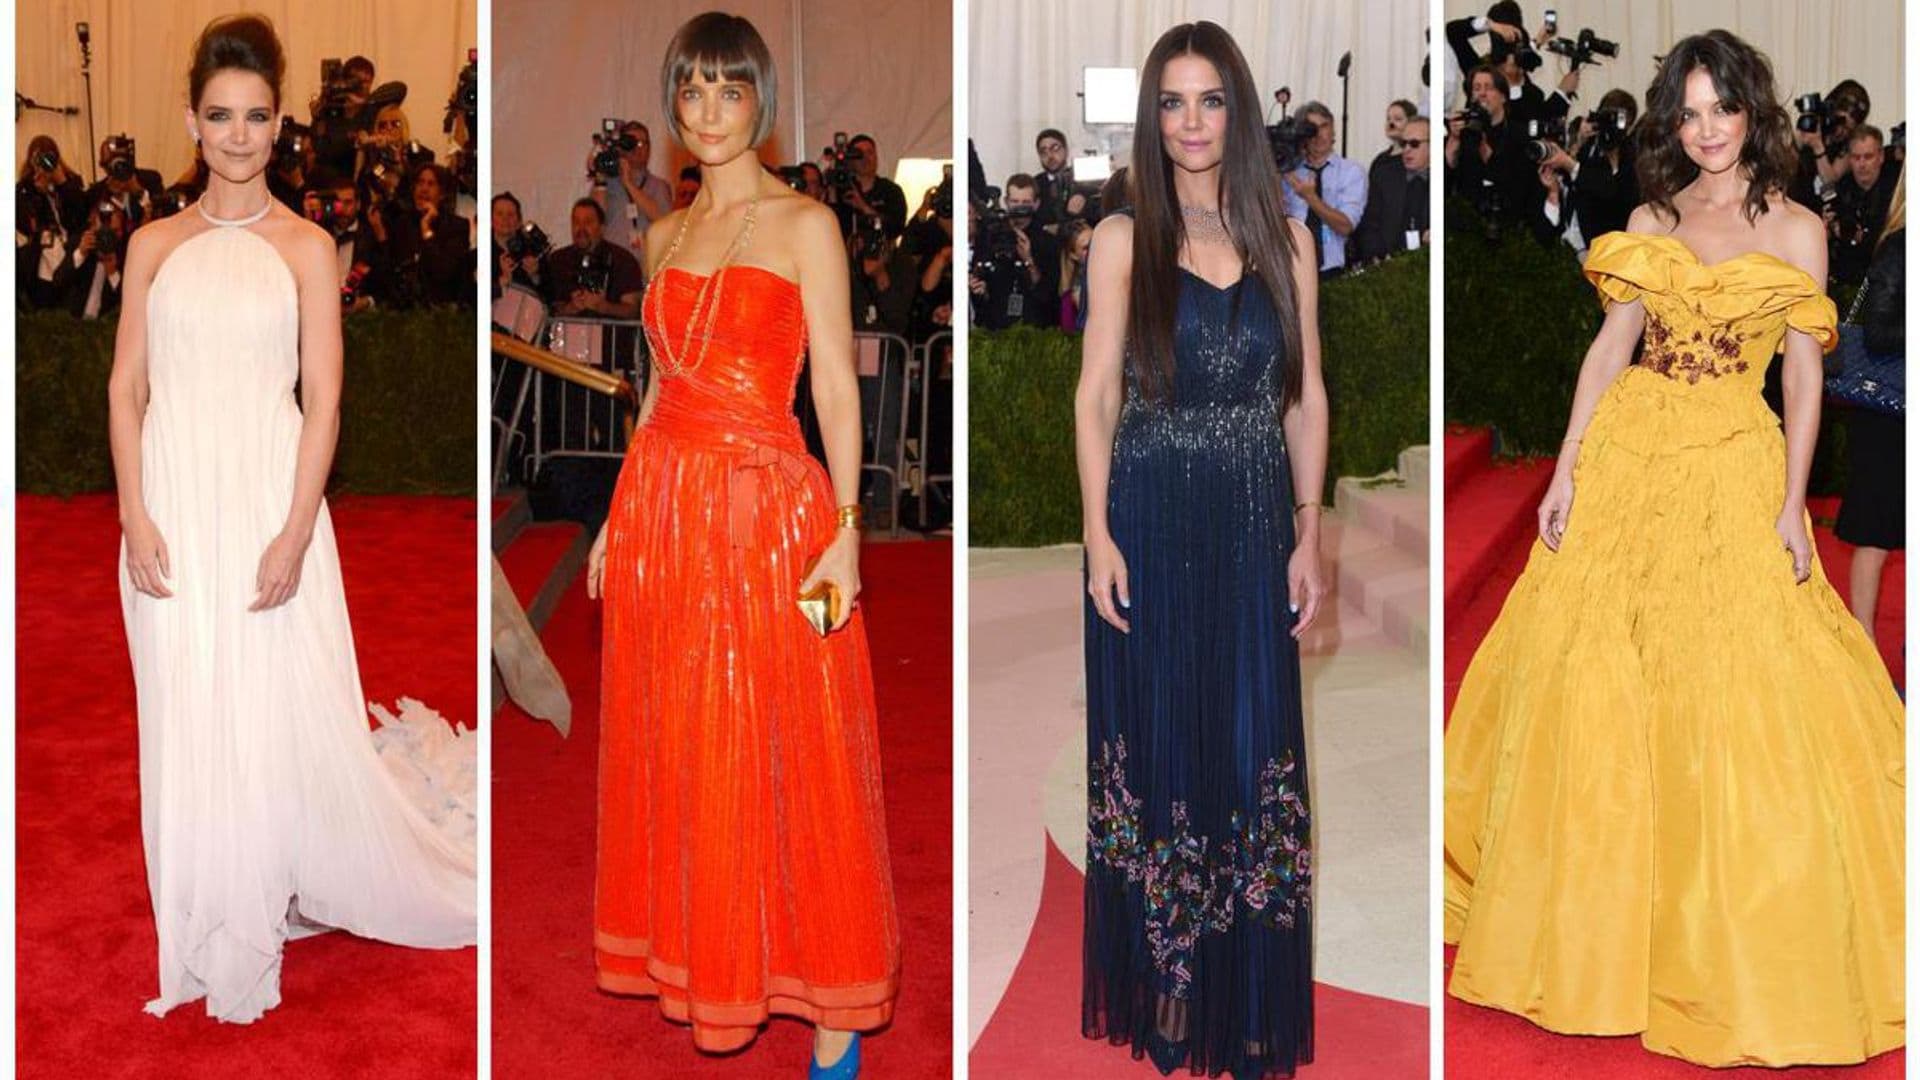 Katie Holmes at the Met Gala: a look back at her most memorable looks